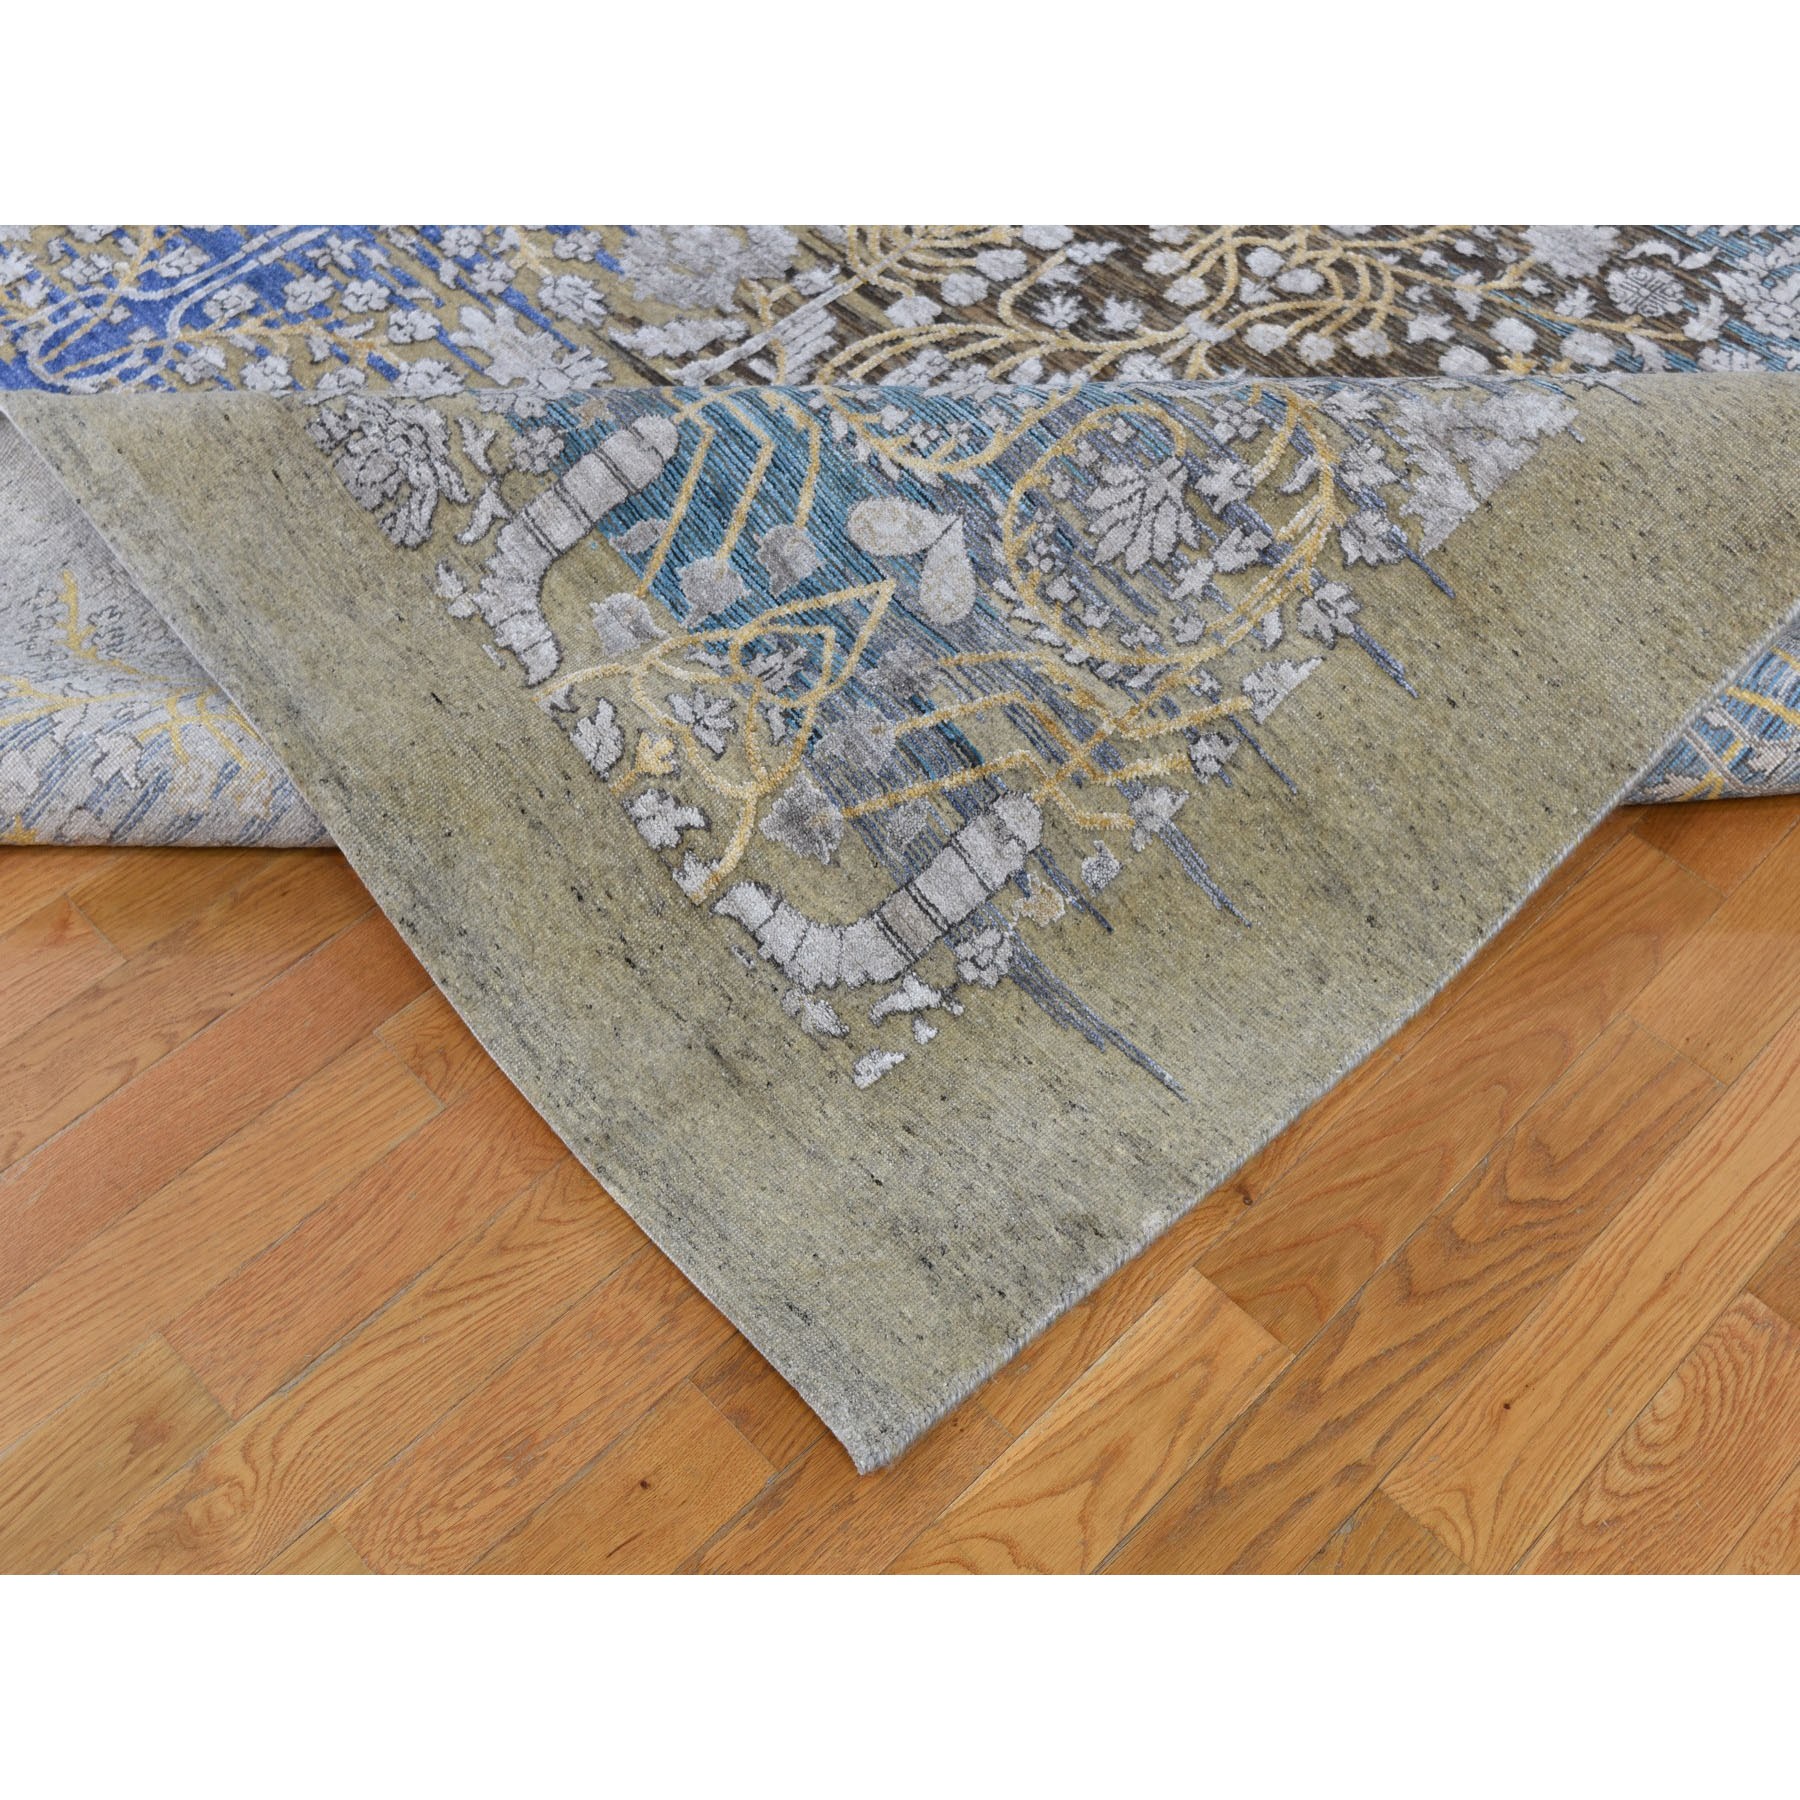 12-2 x15-4  Oversized Silk with Textured Wool Transitional Sarouk Hand Knotted Oriental Rug 